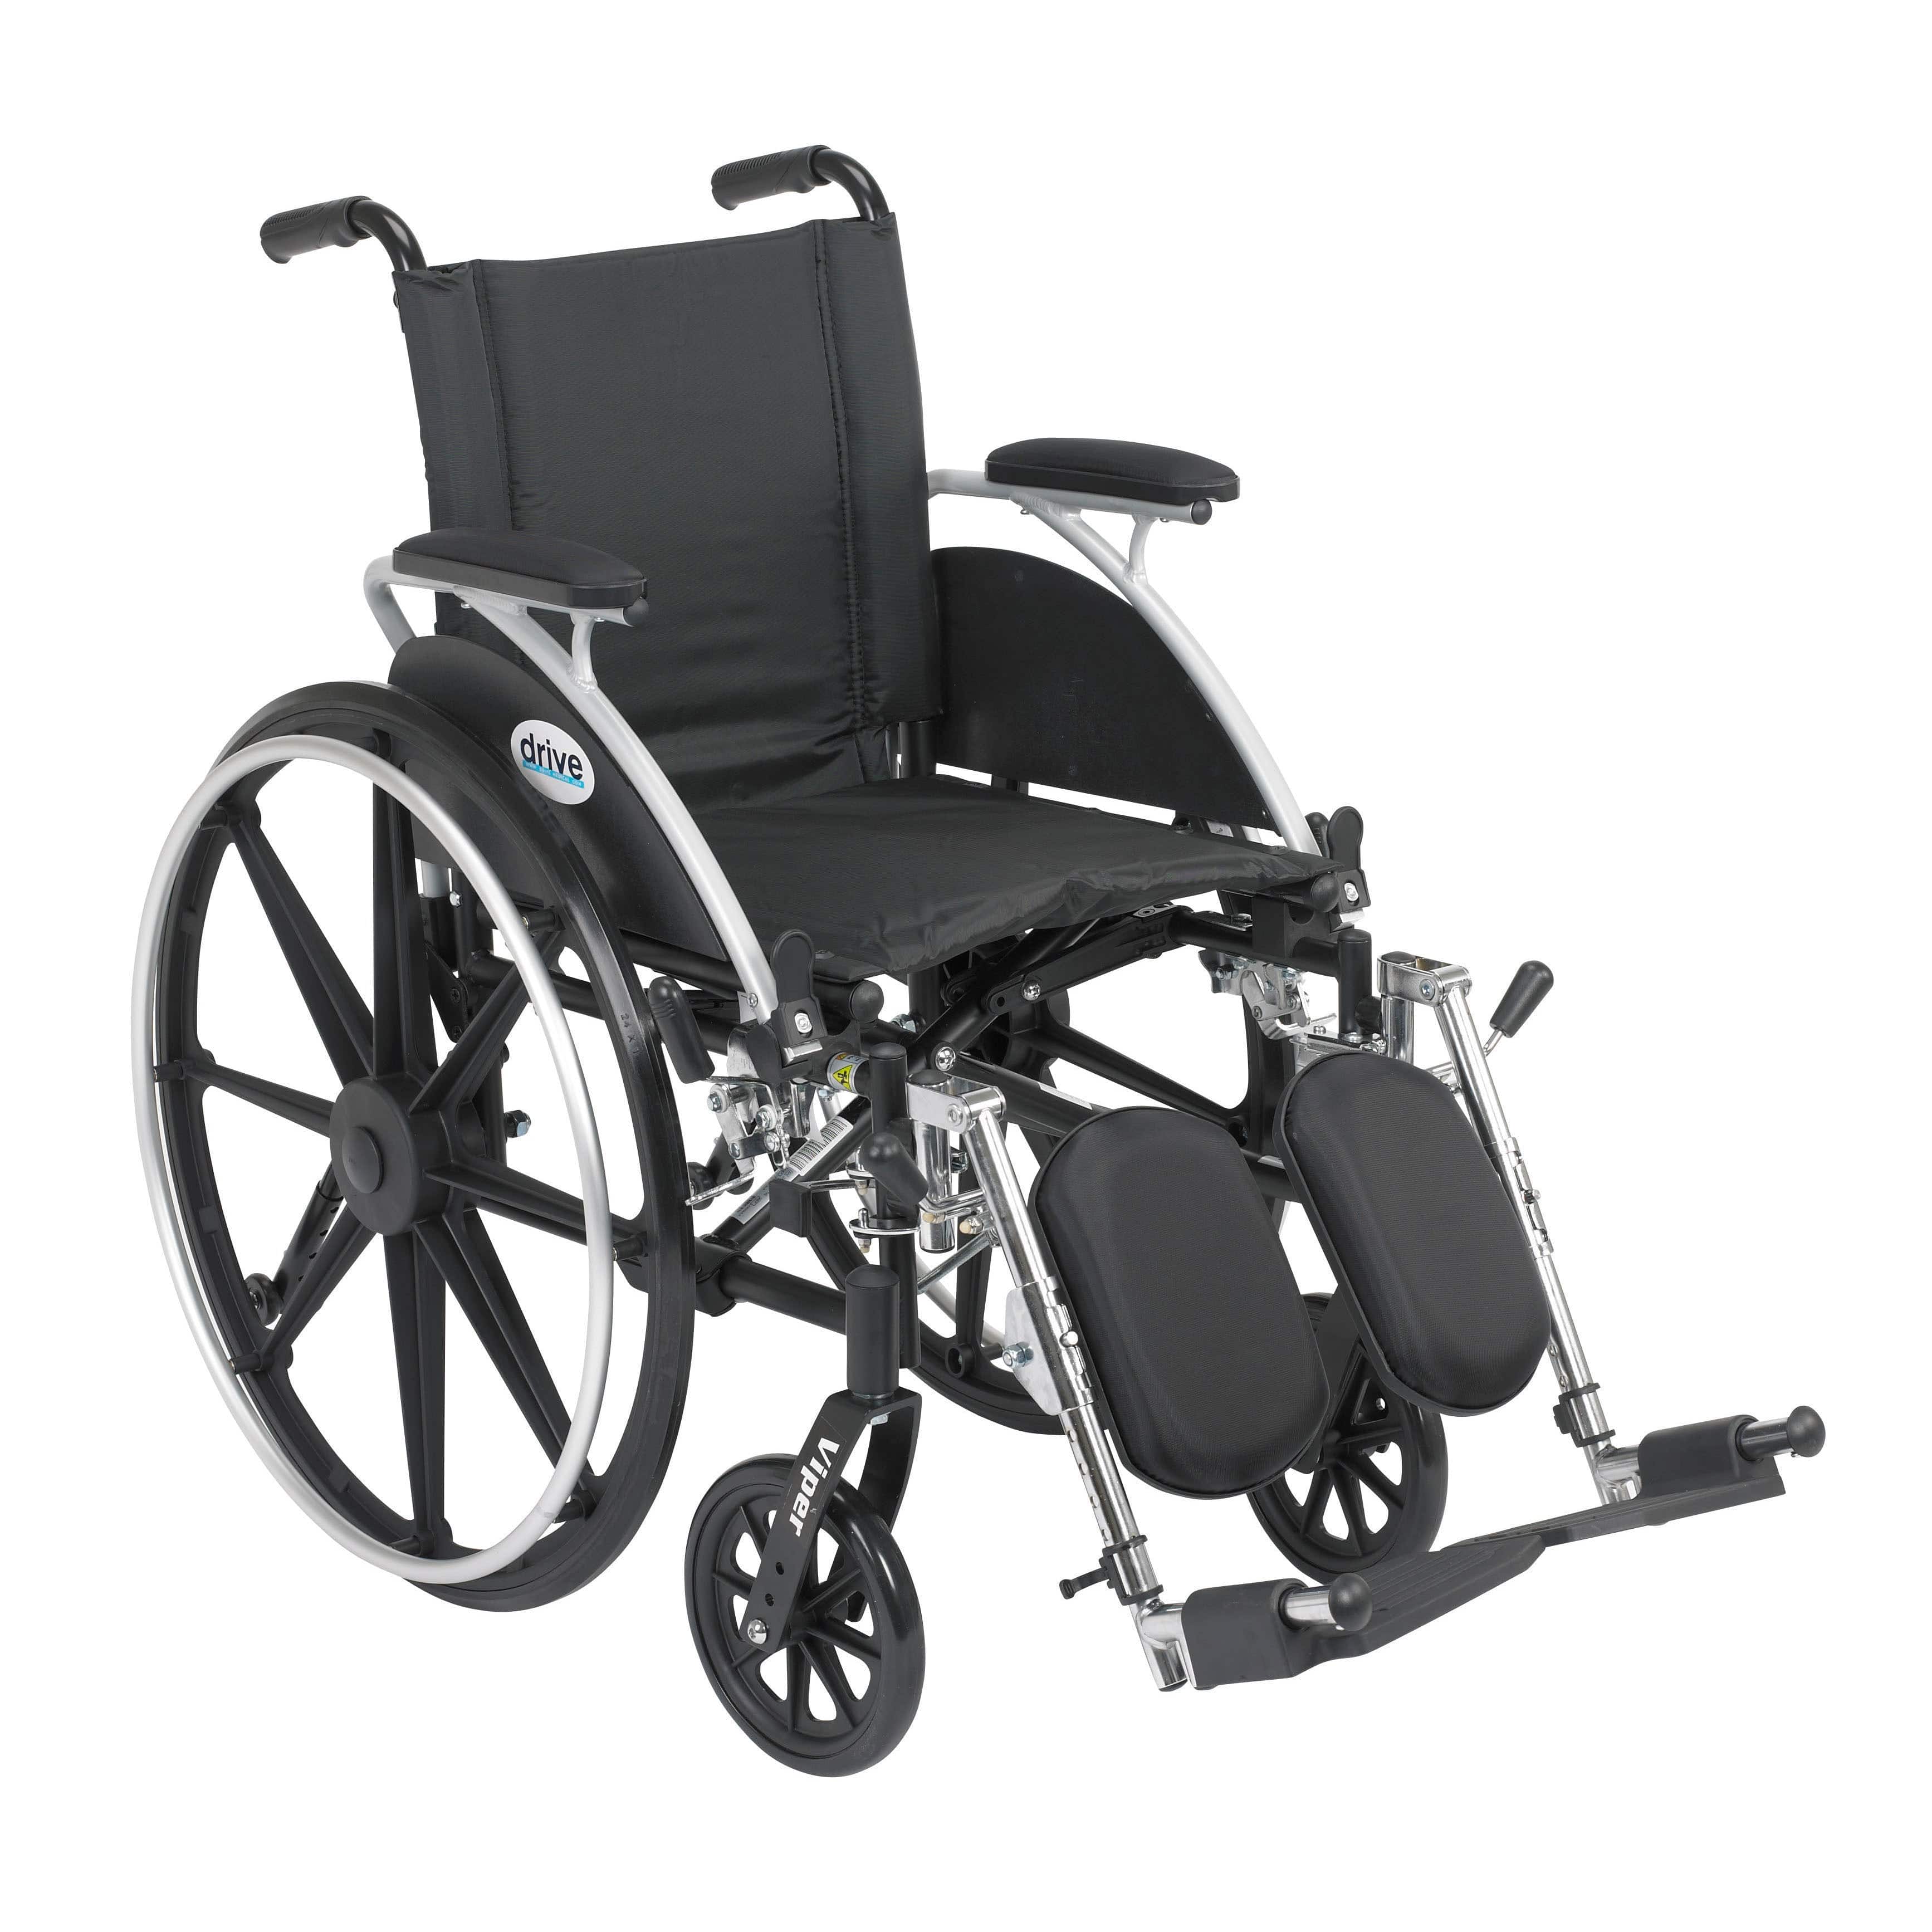 Drive Medical Wheelchairs Flip Back Removable Desk Arms and Elevating Leg Rests / 14" Seat Drive Medical Viper Wheelchair with Flip Back Removable Arms